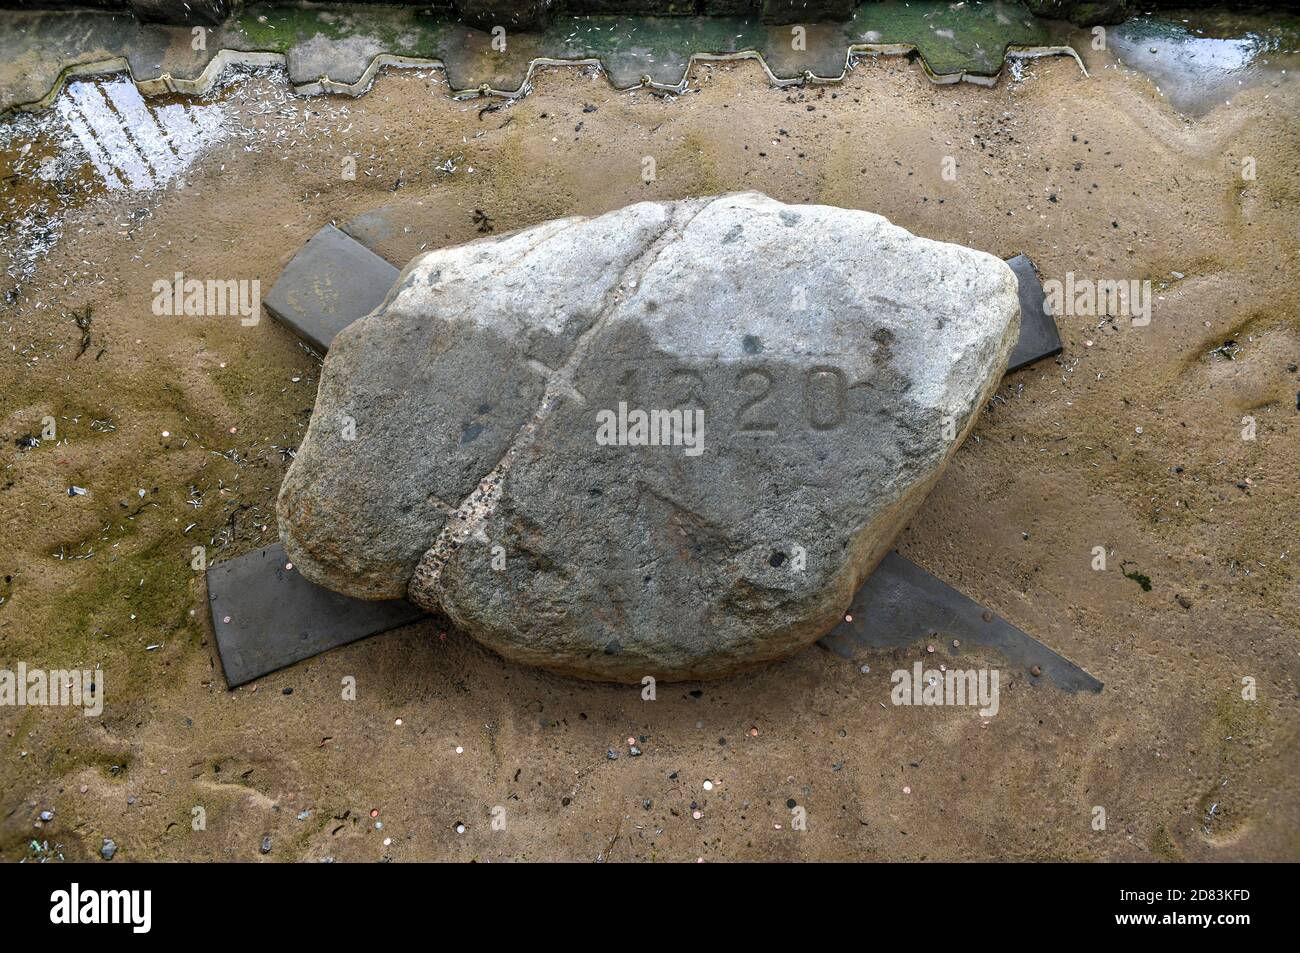 The famous Plymouth Rock, the traditional site of disembarkation of the Mayflower pilgrims in the New World. Stock Photo